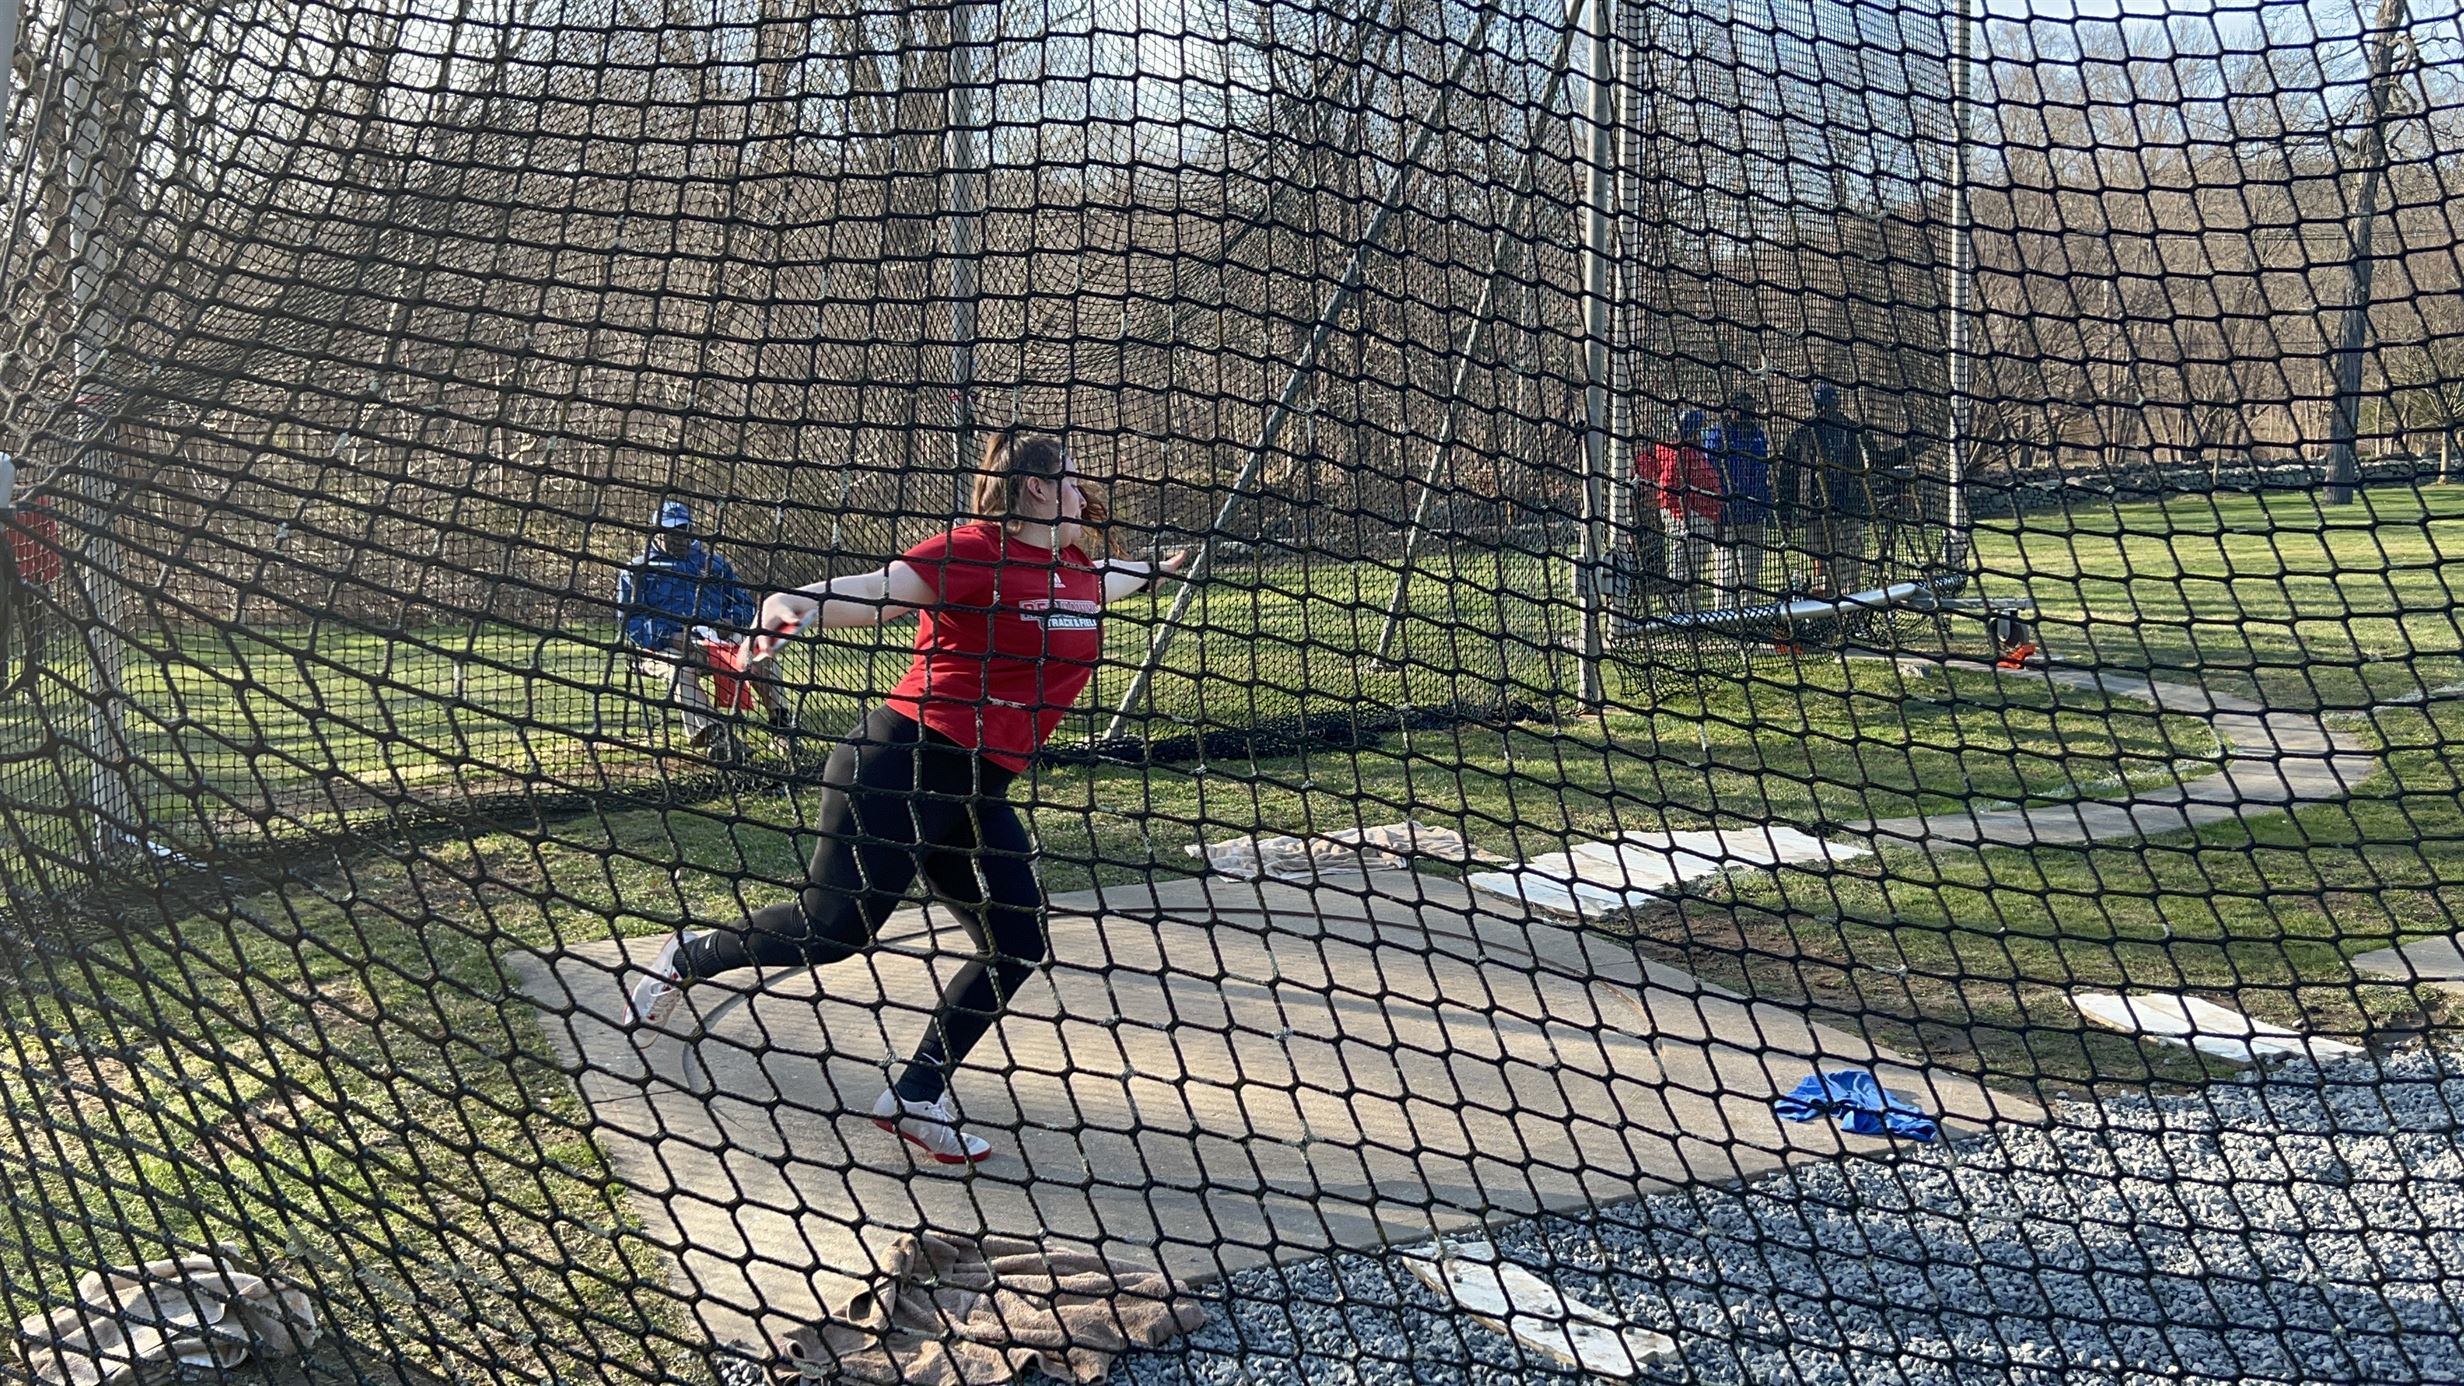 At the discus thrower, Mastroianni hit a personal record of 34.57 meters at the Oscar Moore Invitational on March 26, the team’s first meet of the season. Photo courtesy of Montclair State Athletics